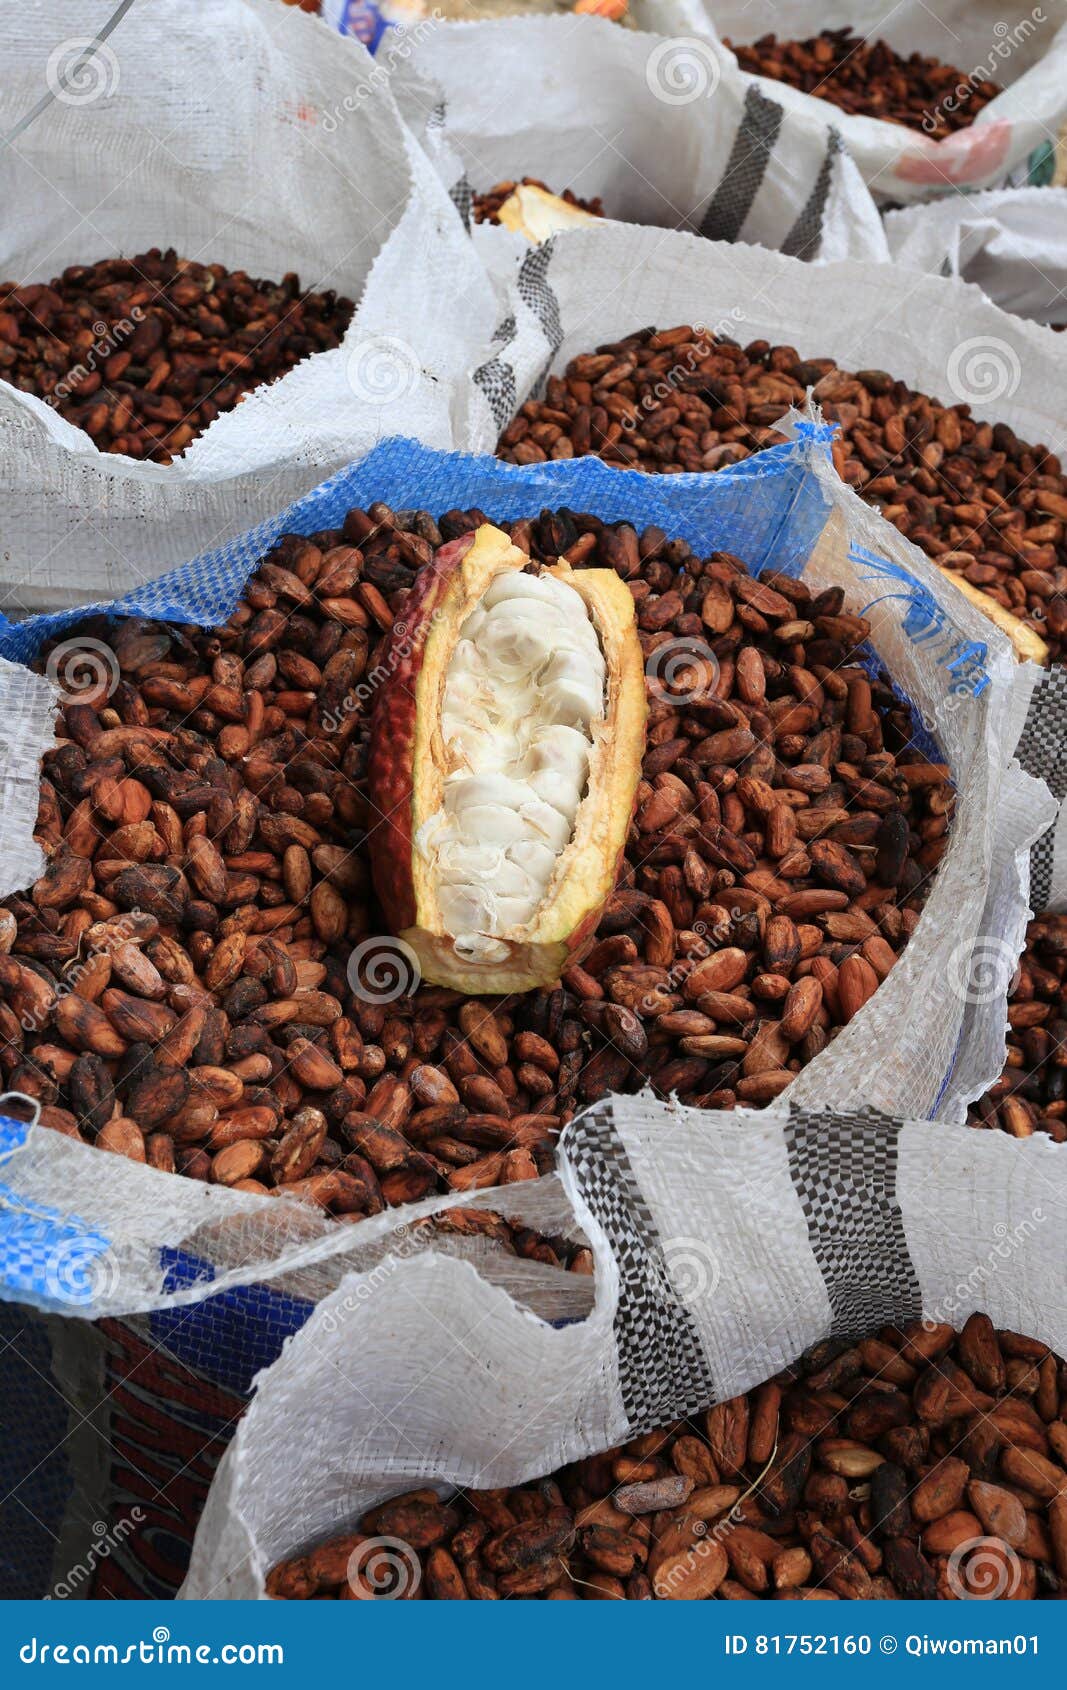 cacao beans in sacks